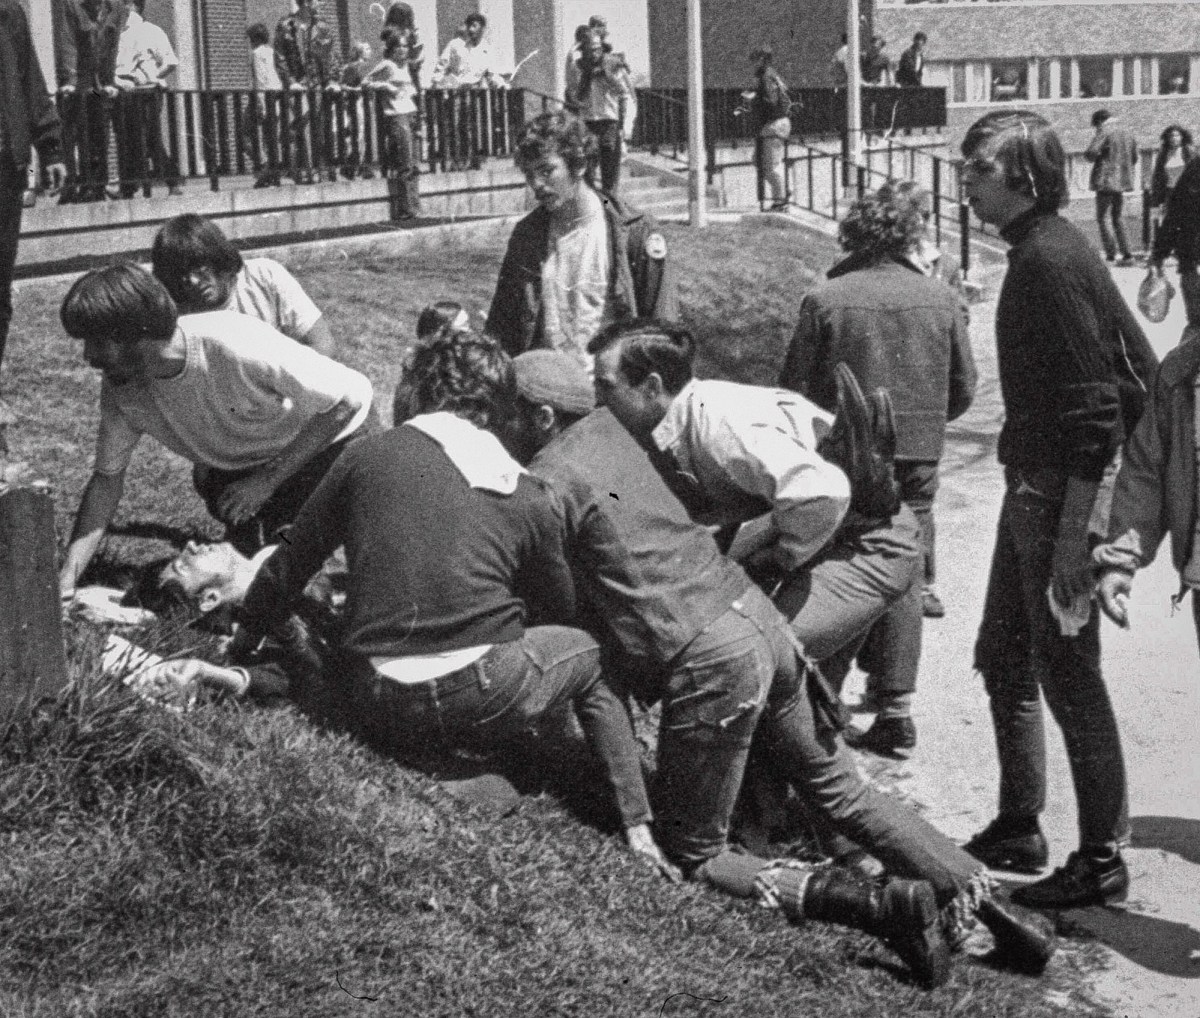 A Kent State University student lies on the ground after National Guardsman fired into a crowd of demonstrators on May 4, 1970 in Kent, Ohio.  (AP Photo)